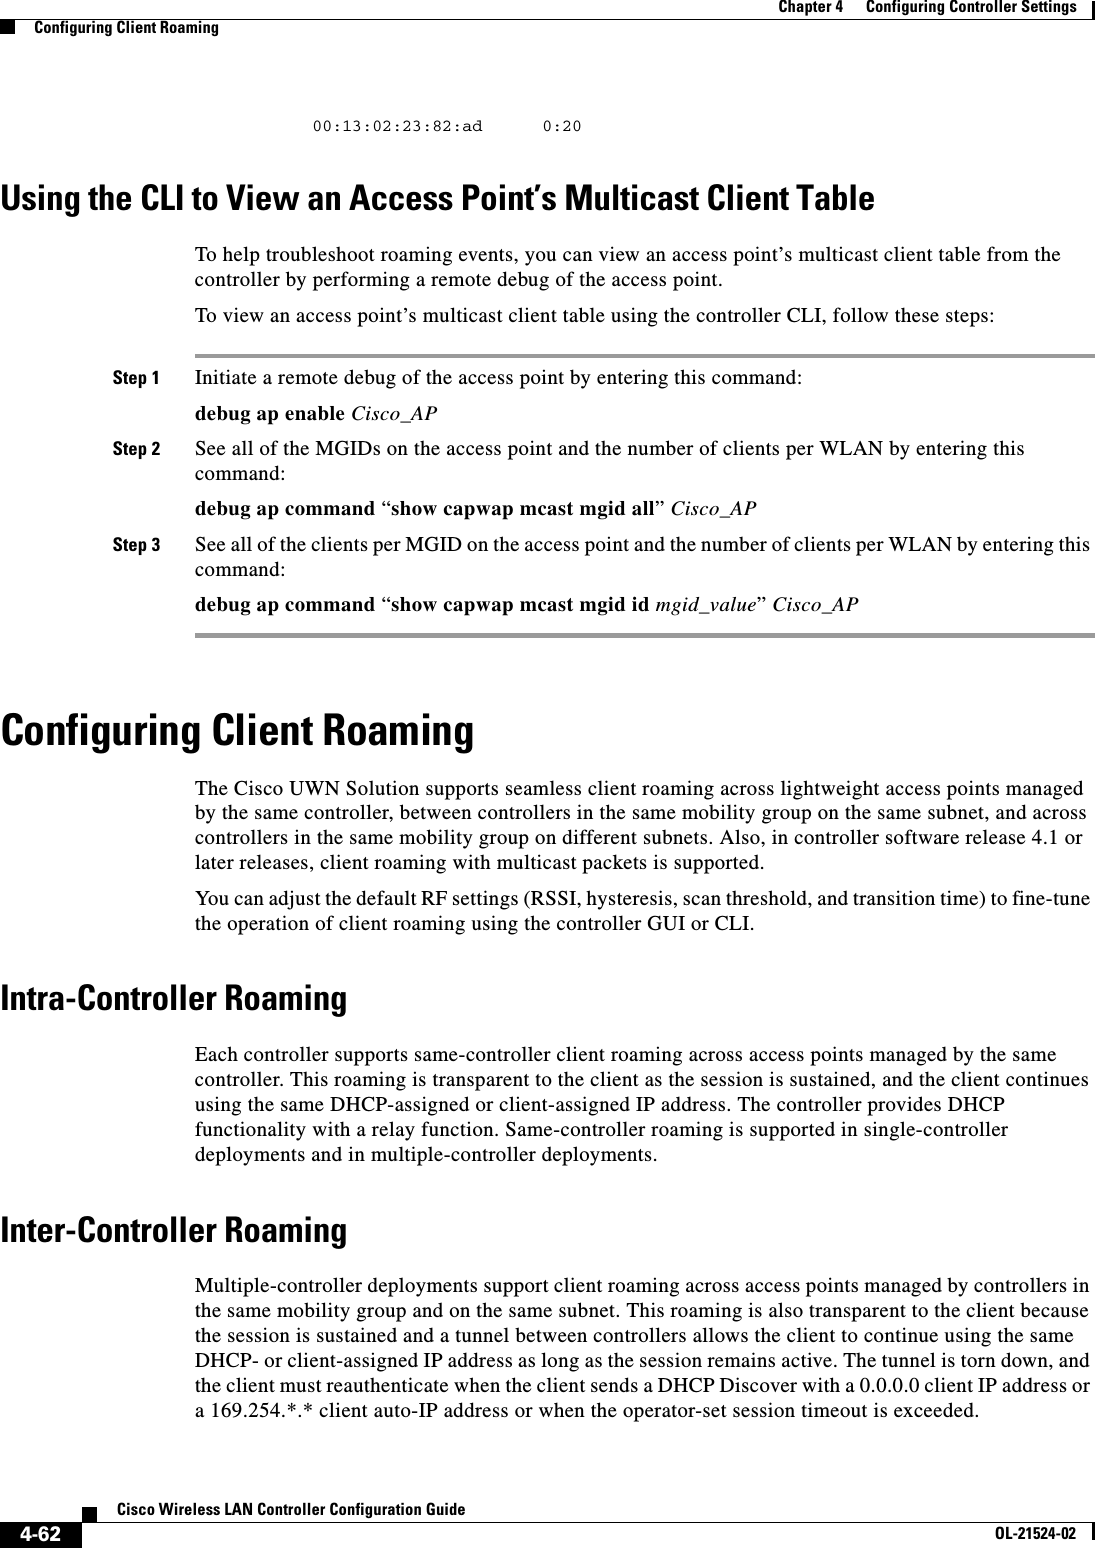  4-62Cisco Wireless LAN Controller Configuration GuideOL-21524-02Chapter 4      Configuring Controller SettingsConfiguring Client Roaming        00:13:02:23:82:ad      0:20Using the CLI to View an Access Point’s Multicast Client TableTo help troubleshoot roaming events, you can view an access point’s multicast client table from the controller by performing a remote debug of the access point.To view an access point’s multicast client table using the controller CLI, follow these steps:Step 1 Initiate a remote debug of the access point by entering this command:debug ap enable Cisco_APStep 2 See all of the MGIDs on the access point and the number of clients per WLAN by entering this command:debug ap command “show capwap mcast mgid all” Cisco_APStep 3 See all of the clients per MGID on the access point and the number of clients per WLAN by entering this command:debug ap command “show capwap mcast mgid id mgid_value” Cisco_APConfiguring Client RoamingThe Cisco UWN Solution supports seamless client roaming across lightweight access points managed by the same controller, between controllers in the same mobility group on the same subnet, and across controllers in the same mobility group on different subnets. Also, in controller software release 4.1 or later releases, client roaming with multicast packets is supported.You can adjust the default RF settings (RSSI, hysteresis, scan threshold, and transition time) to fine-tune the operation of client roaming using the controller GUI or CLI.Intra-Controller RoamingEach controller supports same-controller client roaming across access points managed by the same controller. This roaming is transparent to the client as the session is sustained, and the client continues using the same DHCP-assigned or client-assigned IP address. The controller provides DHCP functionality with a relay function. Same-controller roaming is supported in single-controller deployments and in multiple-controller deployments.Inter-Controller RoamingMultiple-controller deployments support client roaming across access points managed by controllers in the same mobility group and on the same subnet. This roaming is also transparent to the client because the session is sustained and a tunnel between controllers allows the client to continue using the same DHCP- or client-assigned IP address as long as the session remains active. The tunnel is torn down, and the client must reauthenticate when the client sends a DHCP Discover with a 0.0.0.0 client IP address or a 169.254.*.* client auto-IP address or when the operator-set session timeout is exceeded.